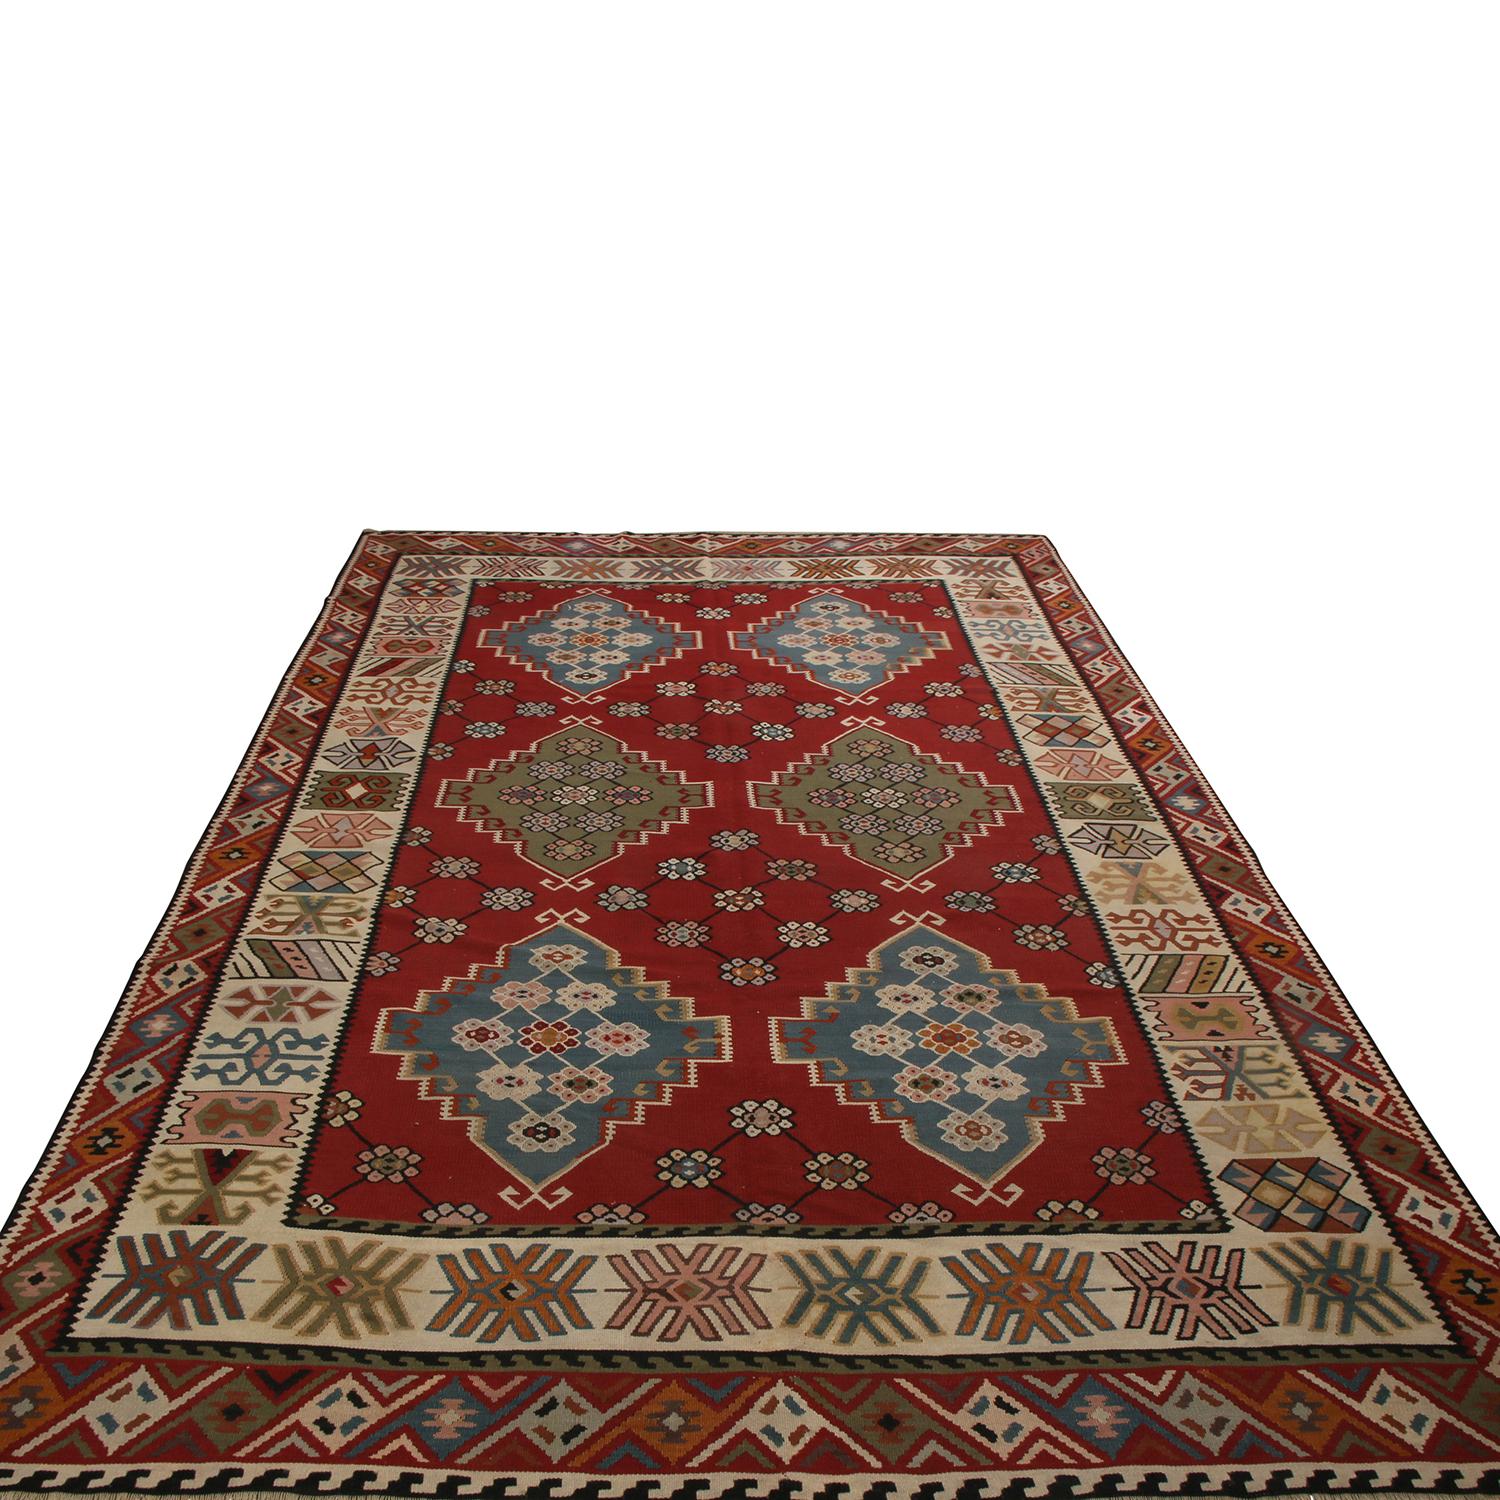 Flat-woven in Turkey between 1890-1900, this antique Basra Kilim features a tasteful marriage of oriental influences in its pattern and colorways, enjoying high-quality wool in excellent condition among its kind. The rich burgundy background, a